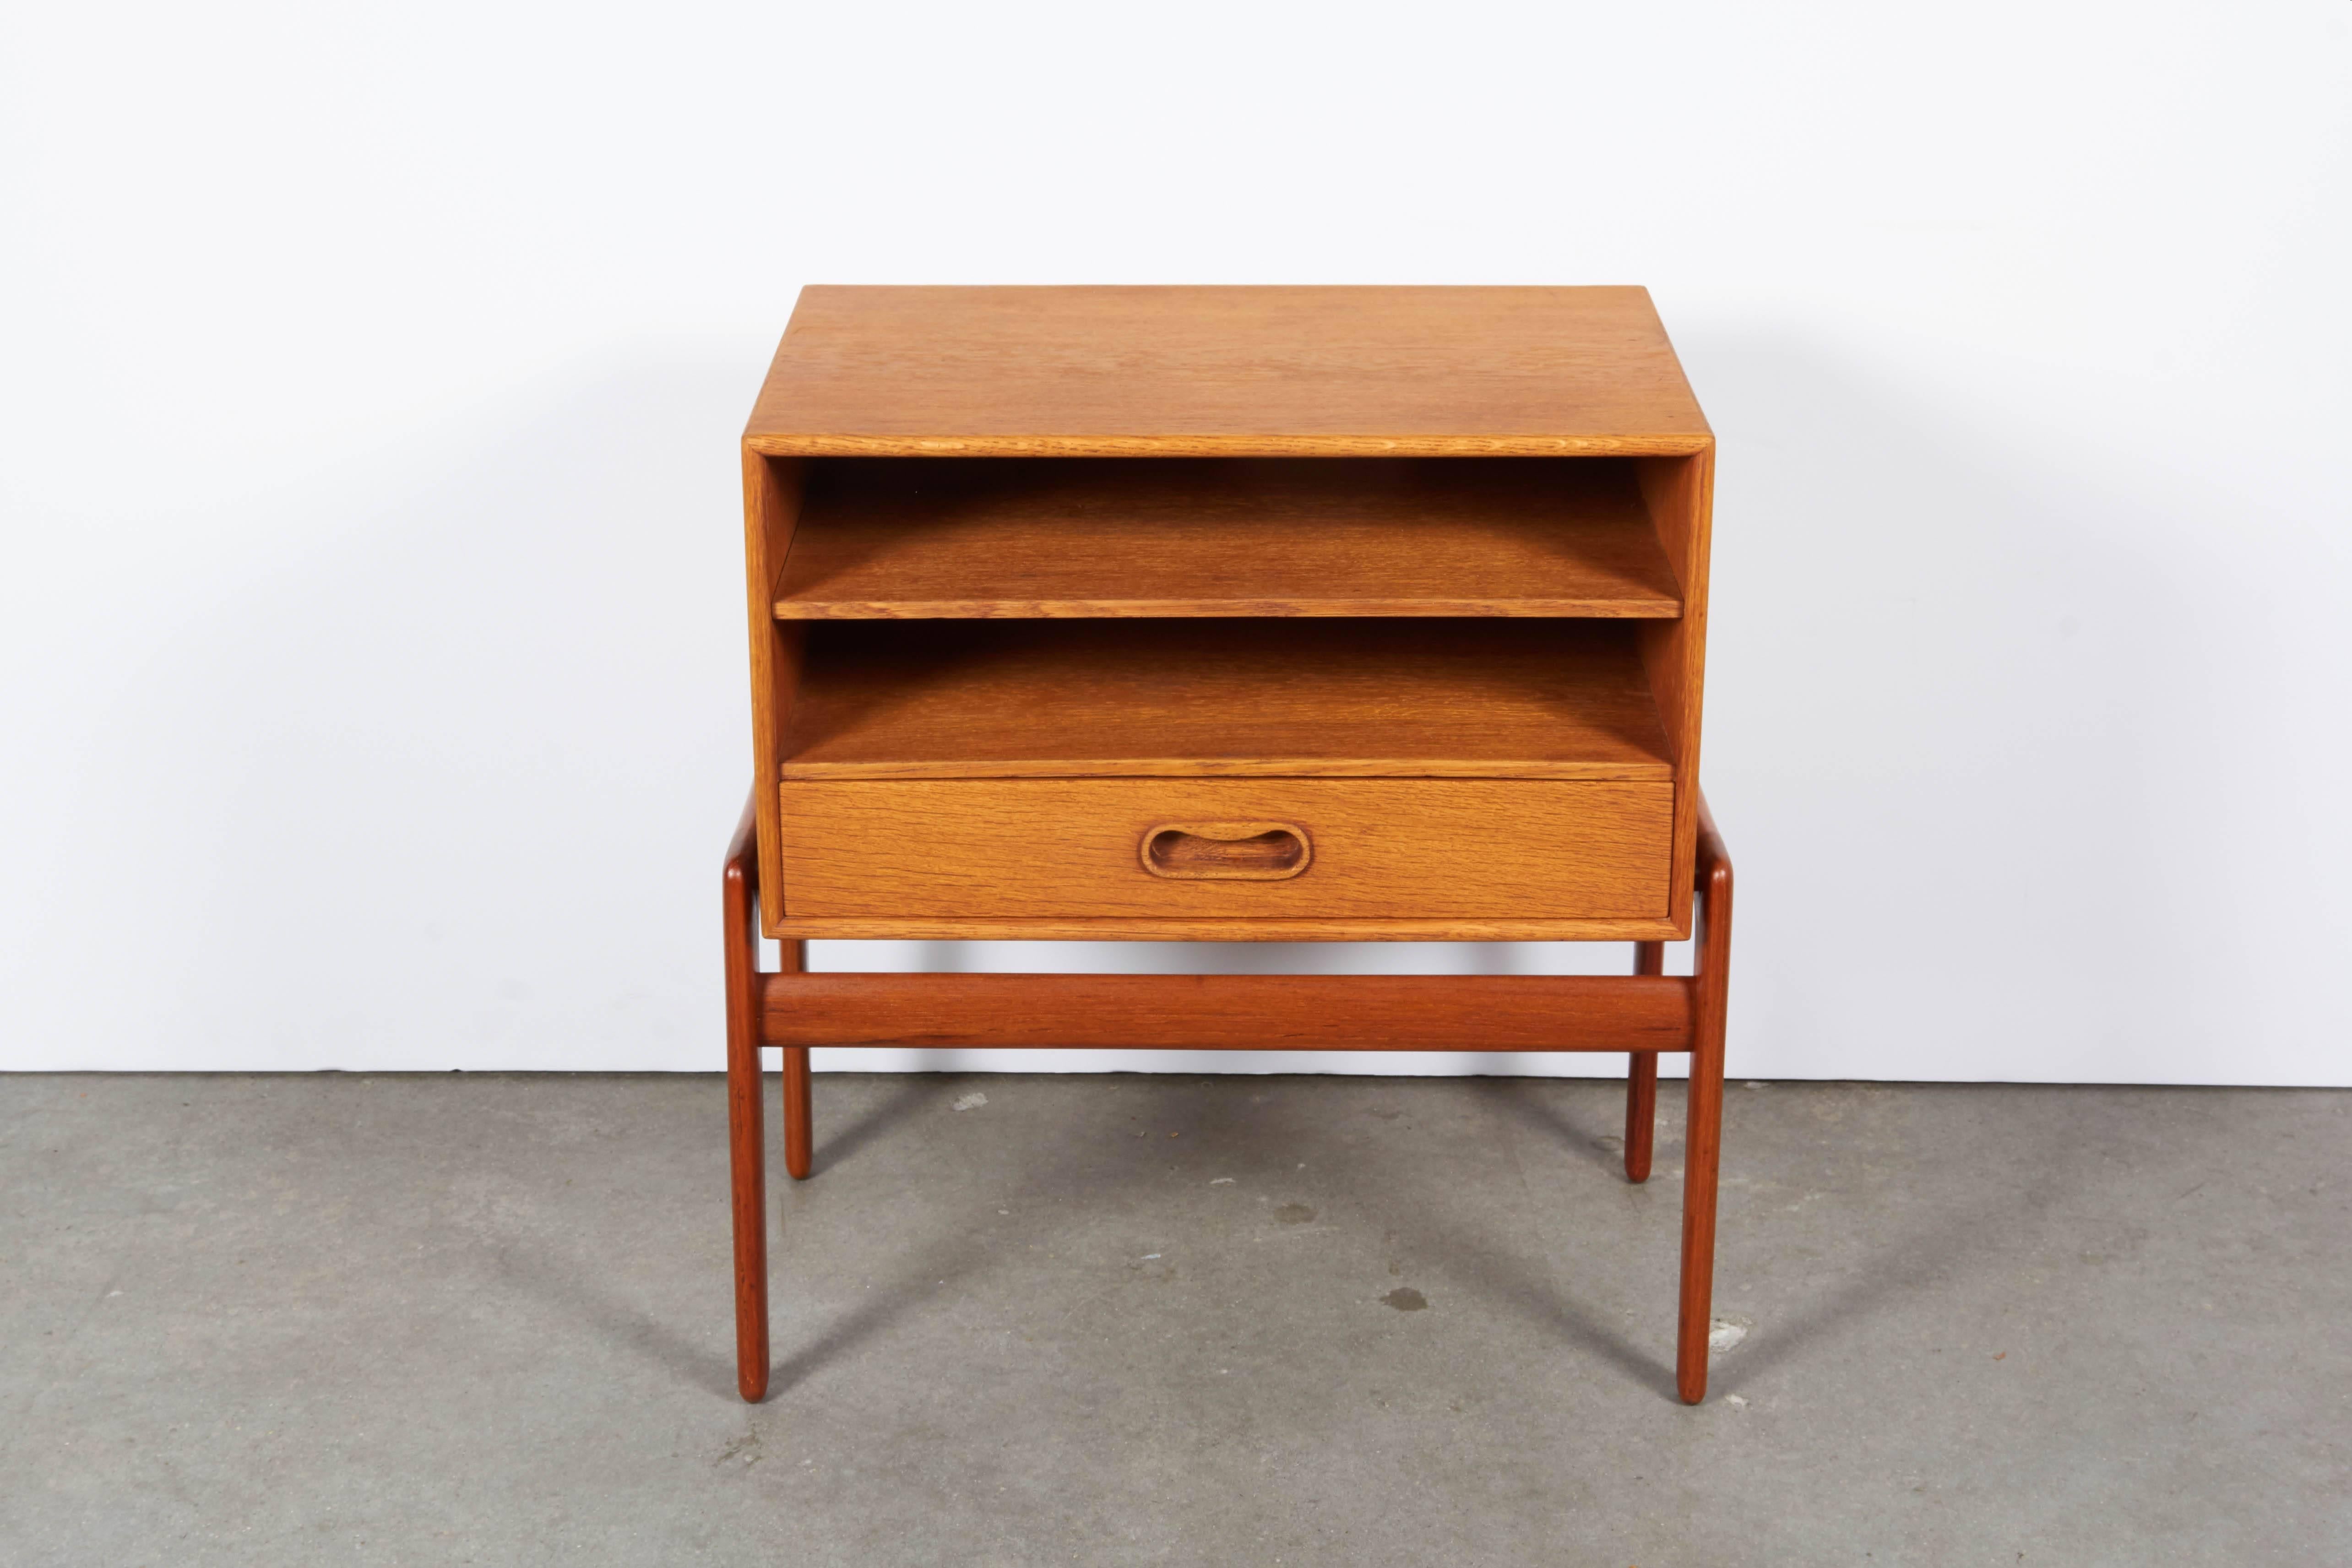 Danish 1950s Oak Bedside Table by Arne Vodder

This mid century bedside table is in excellent condition. Works as a side table in any room. Ready for pick up, delivery, or shipping anywhere in the world.